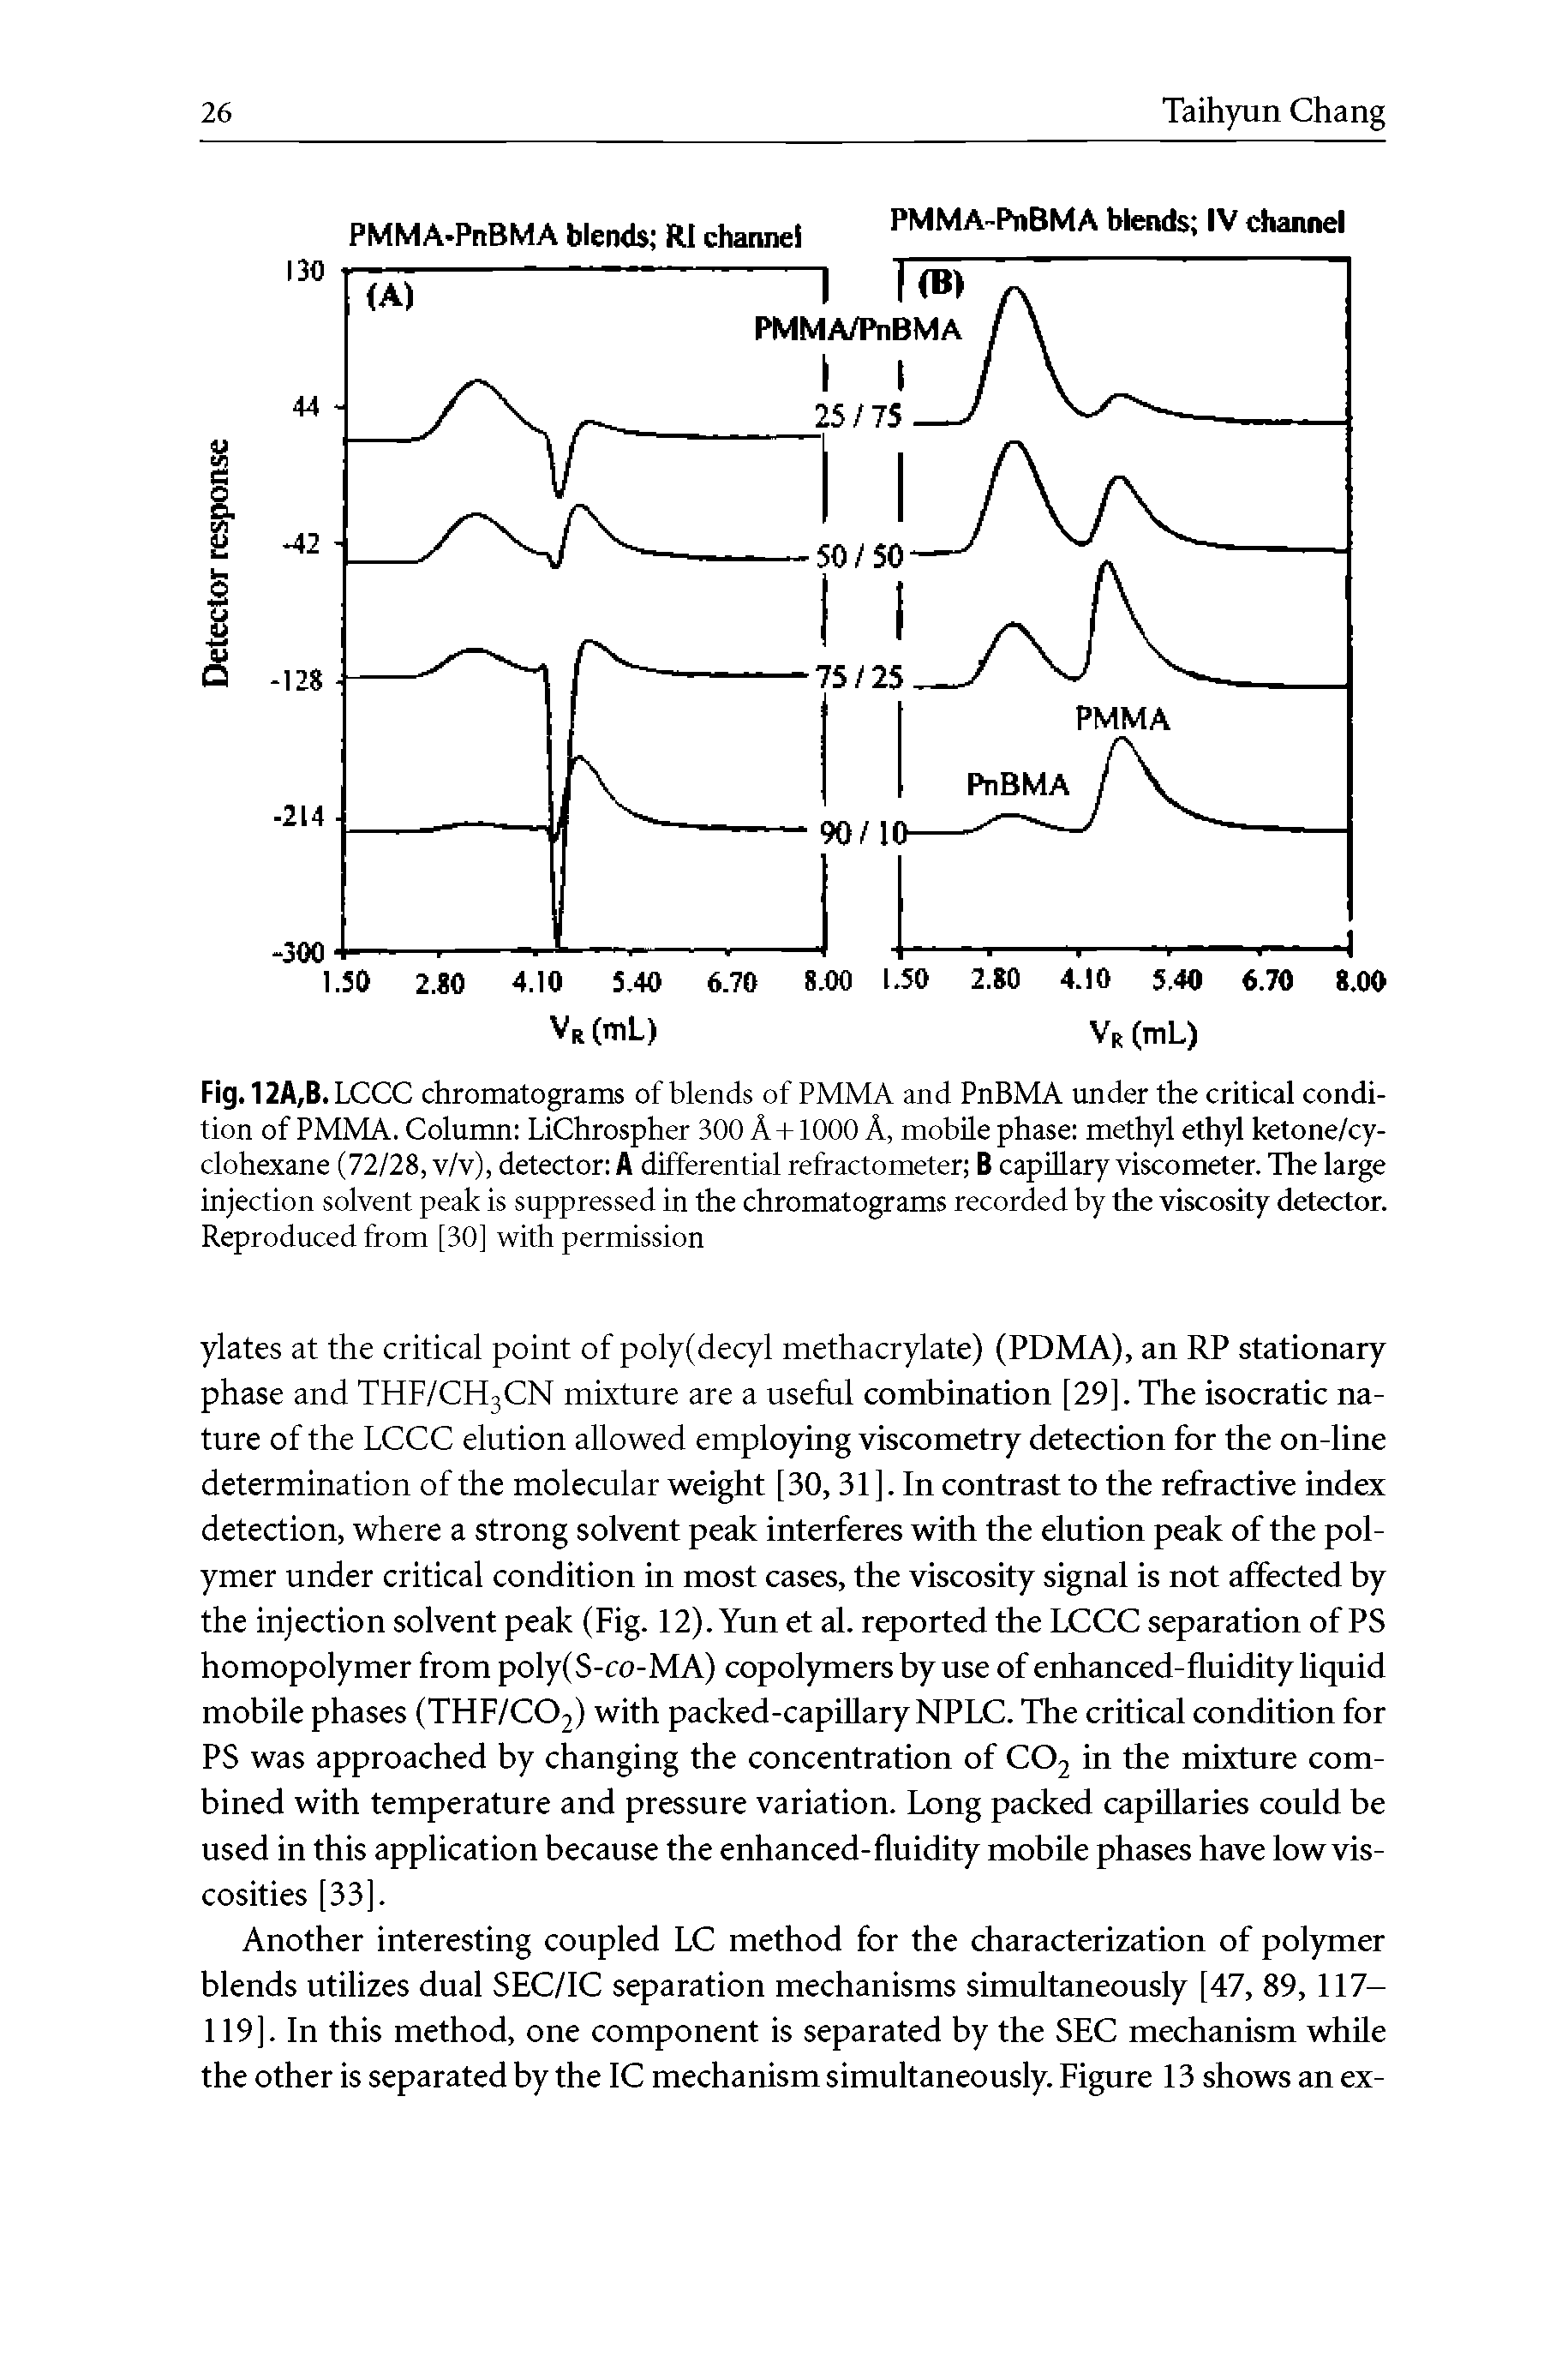 Fig.12A,B. LCCC chromatograms of blends of PMMA and PnBMA under the critical condition of PMMA. Column LiChrospher 300 A +1000 A, mobEe phase methyl ethyl ketone/cy-clohexane (72/28, v/v), detector A differential refractometer B capElary viscometer. The large injection solvent peak is suppressed in the chromatograms recorded by the viscosity detector.